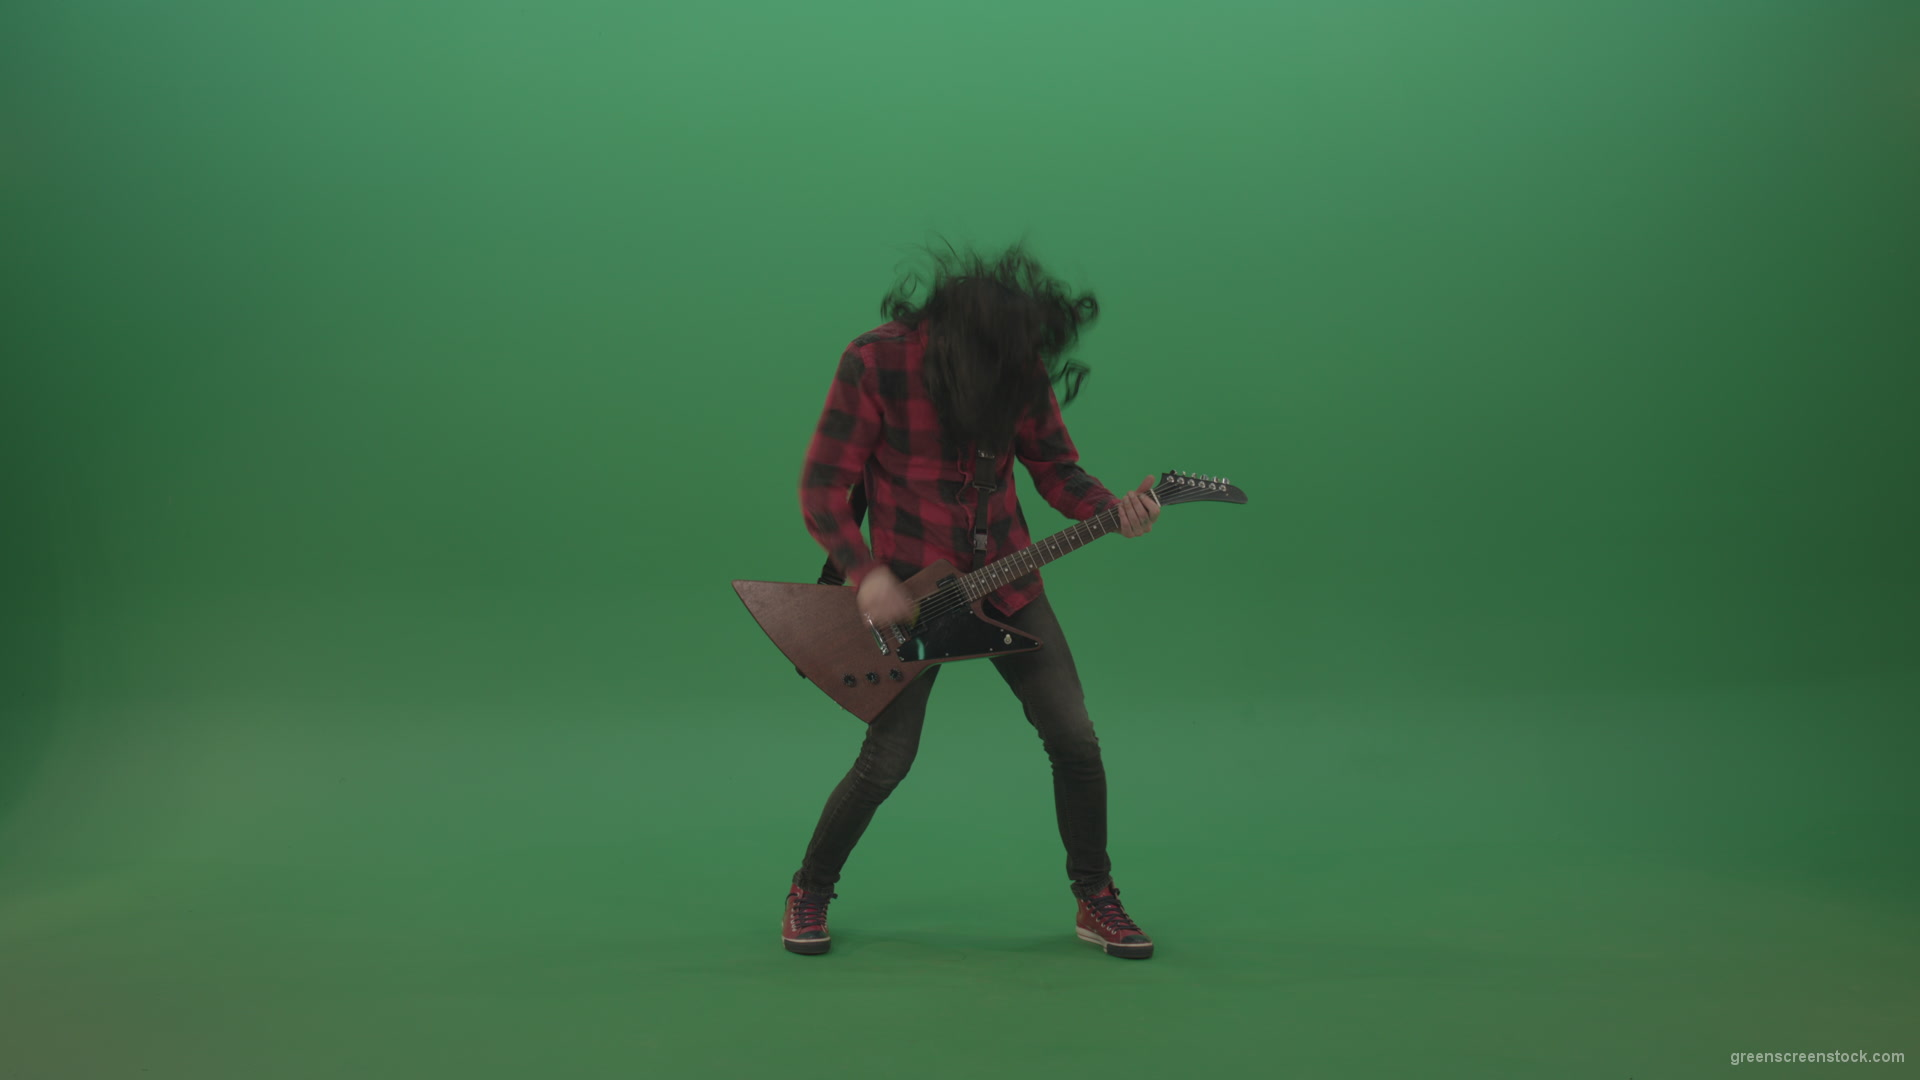 Long-black-hair-hardcore-rock-man-guitarist-play-guitar-and-shaking-head-isolated-on-green-screen_008 Green Screen Stock